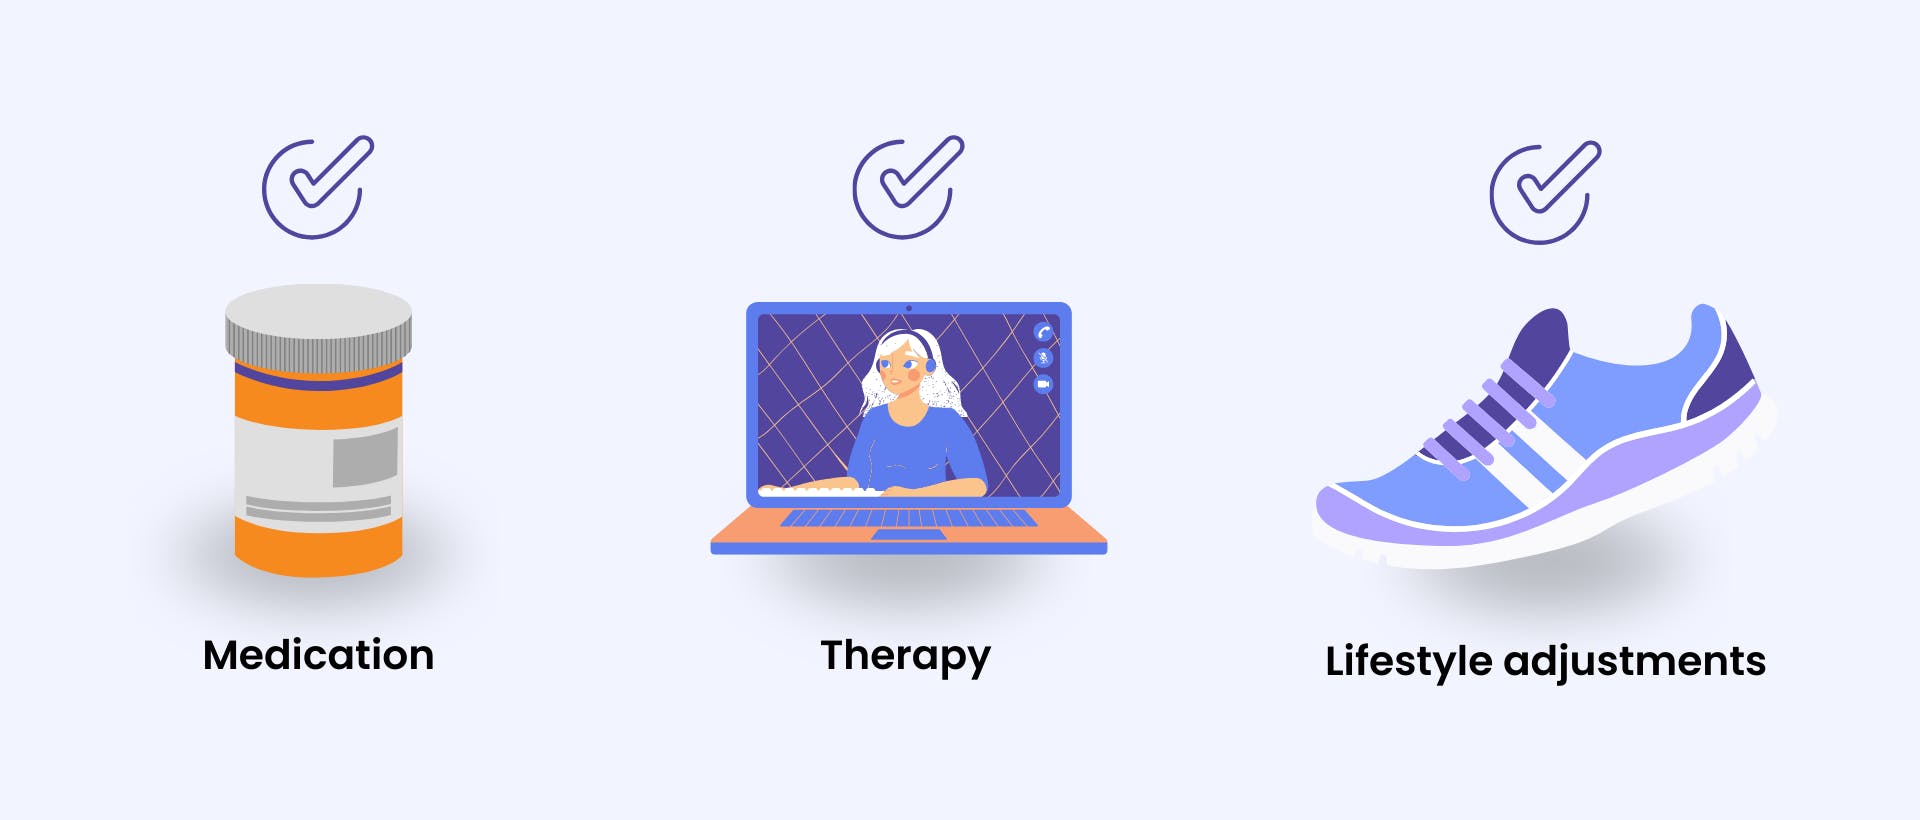 Image highlights bipolar treatment options of medication, therapy, and lifestyle adjustments, and the image includes graphics of a prescription bottle, an online therapist, and a running shoe to denote a healthy lifestyle.